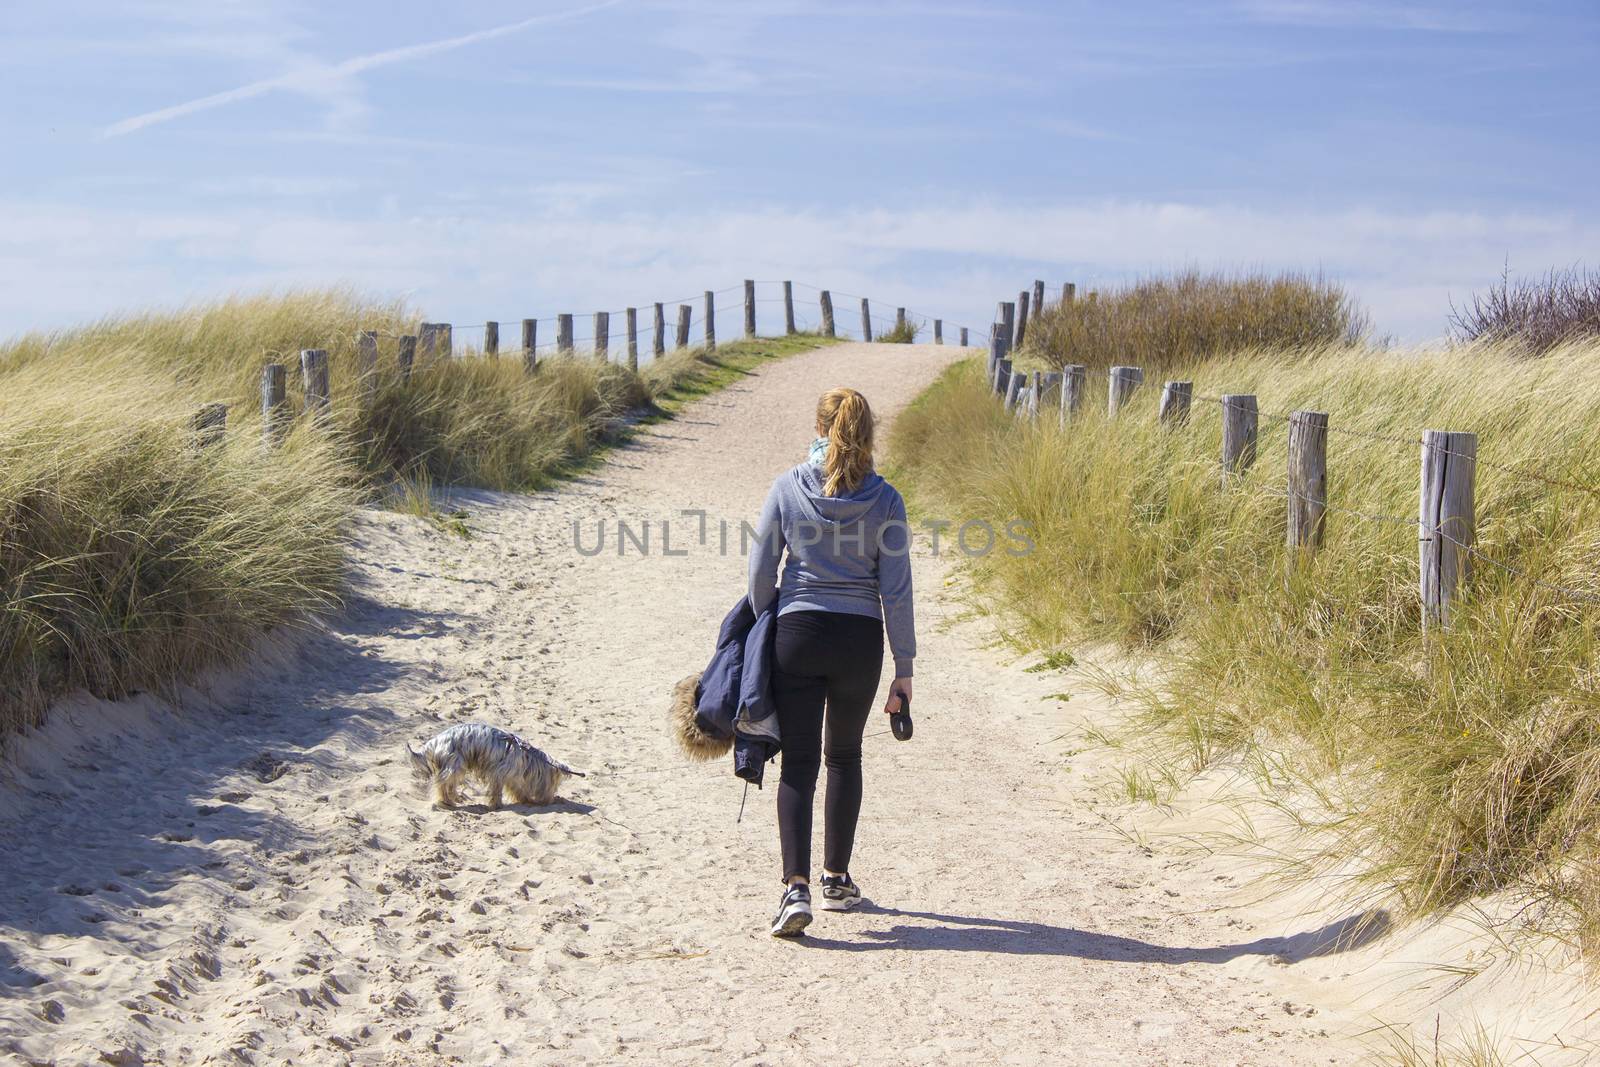 Walking with the dog in the dunes, Zoutelande, Netherlands